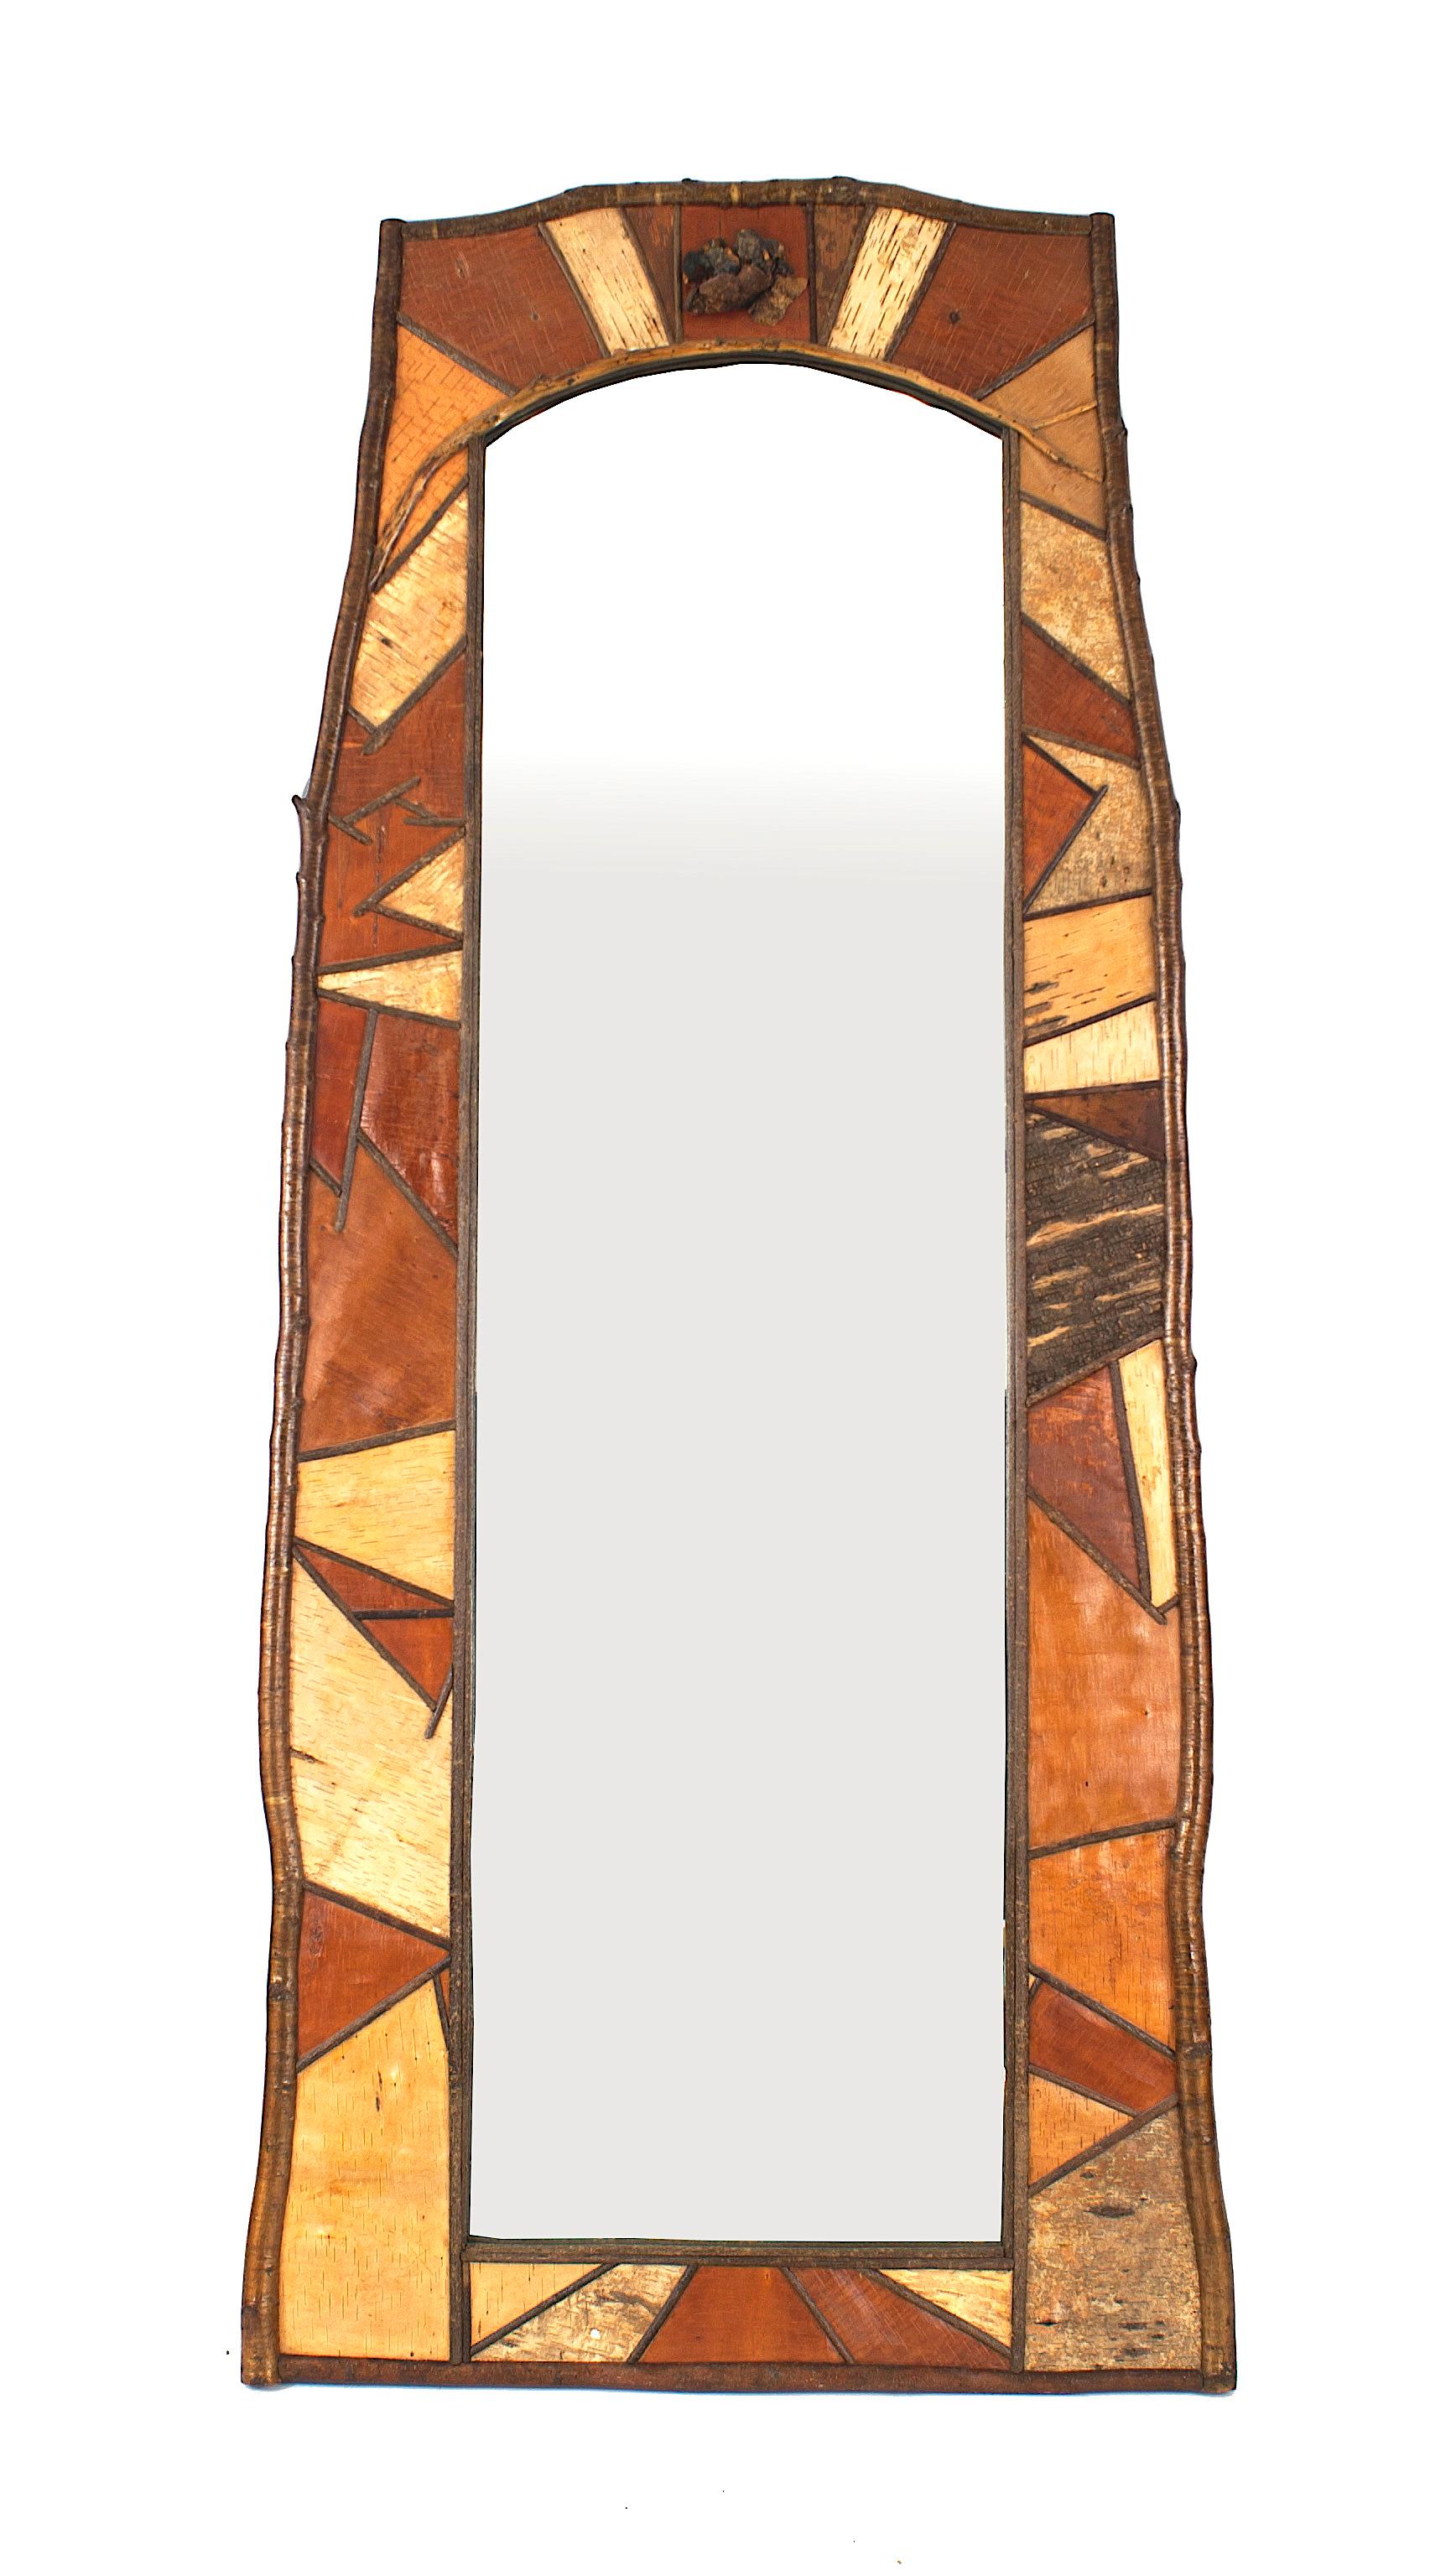 Rustic Adirondack (late 20th Century) asymmetric rectangular tall vertical wall mirror with tan, rust, beige, and gray angular wood veneer panels in a birch frame.
